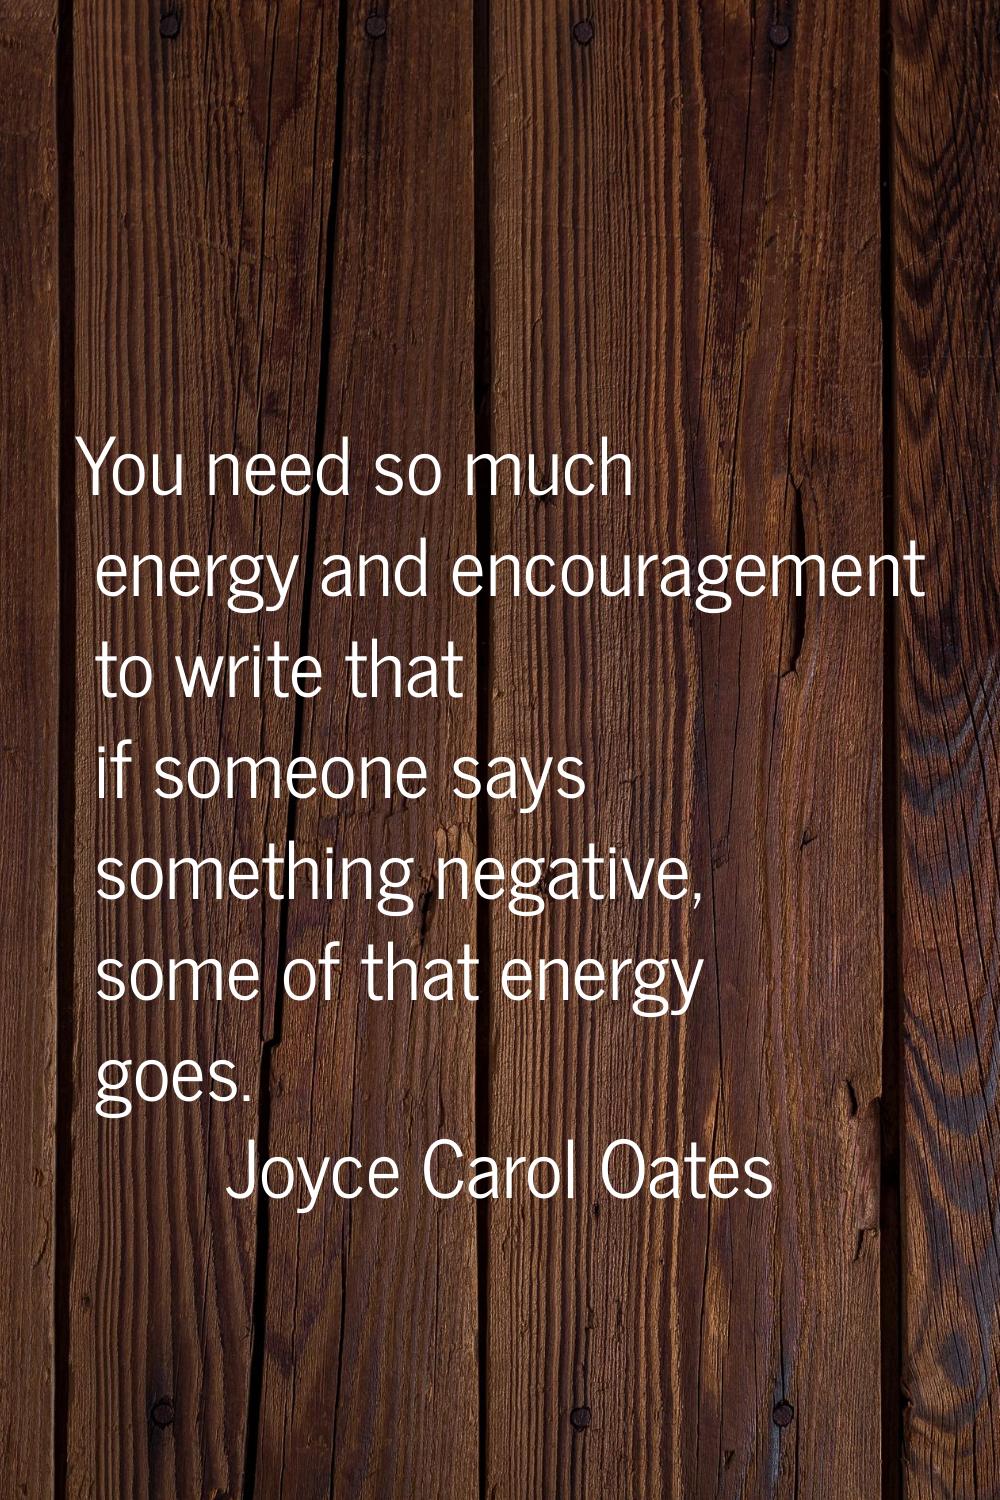 You need so much energy and encouragement to write that if someone says something negative, some of